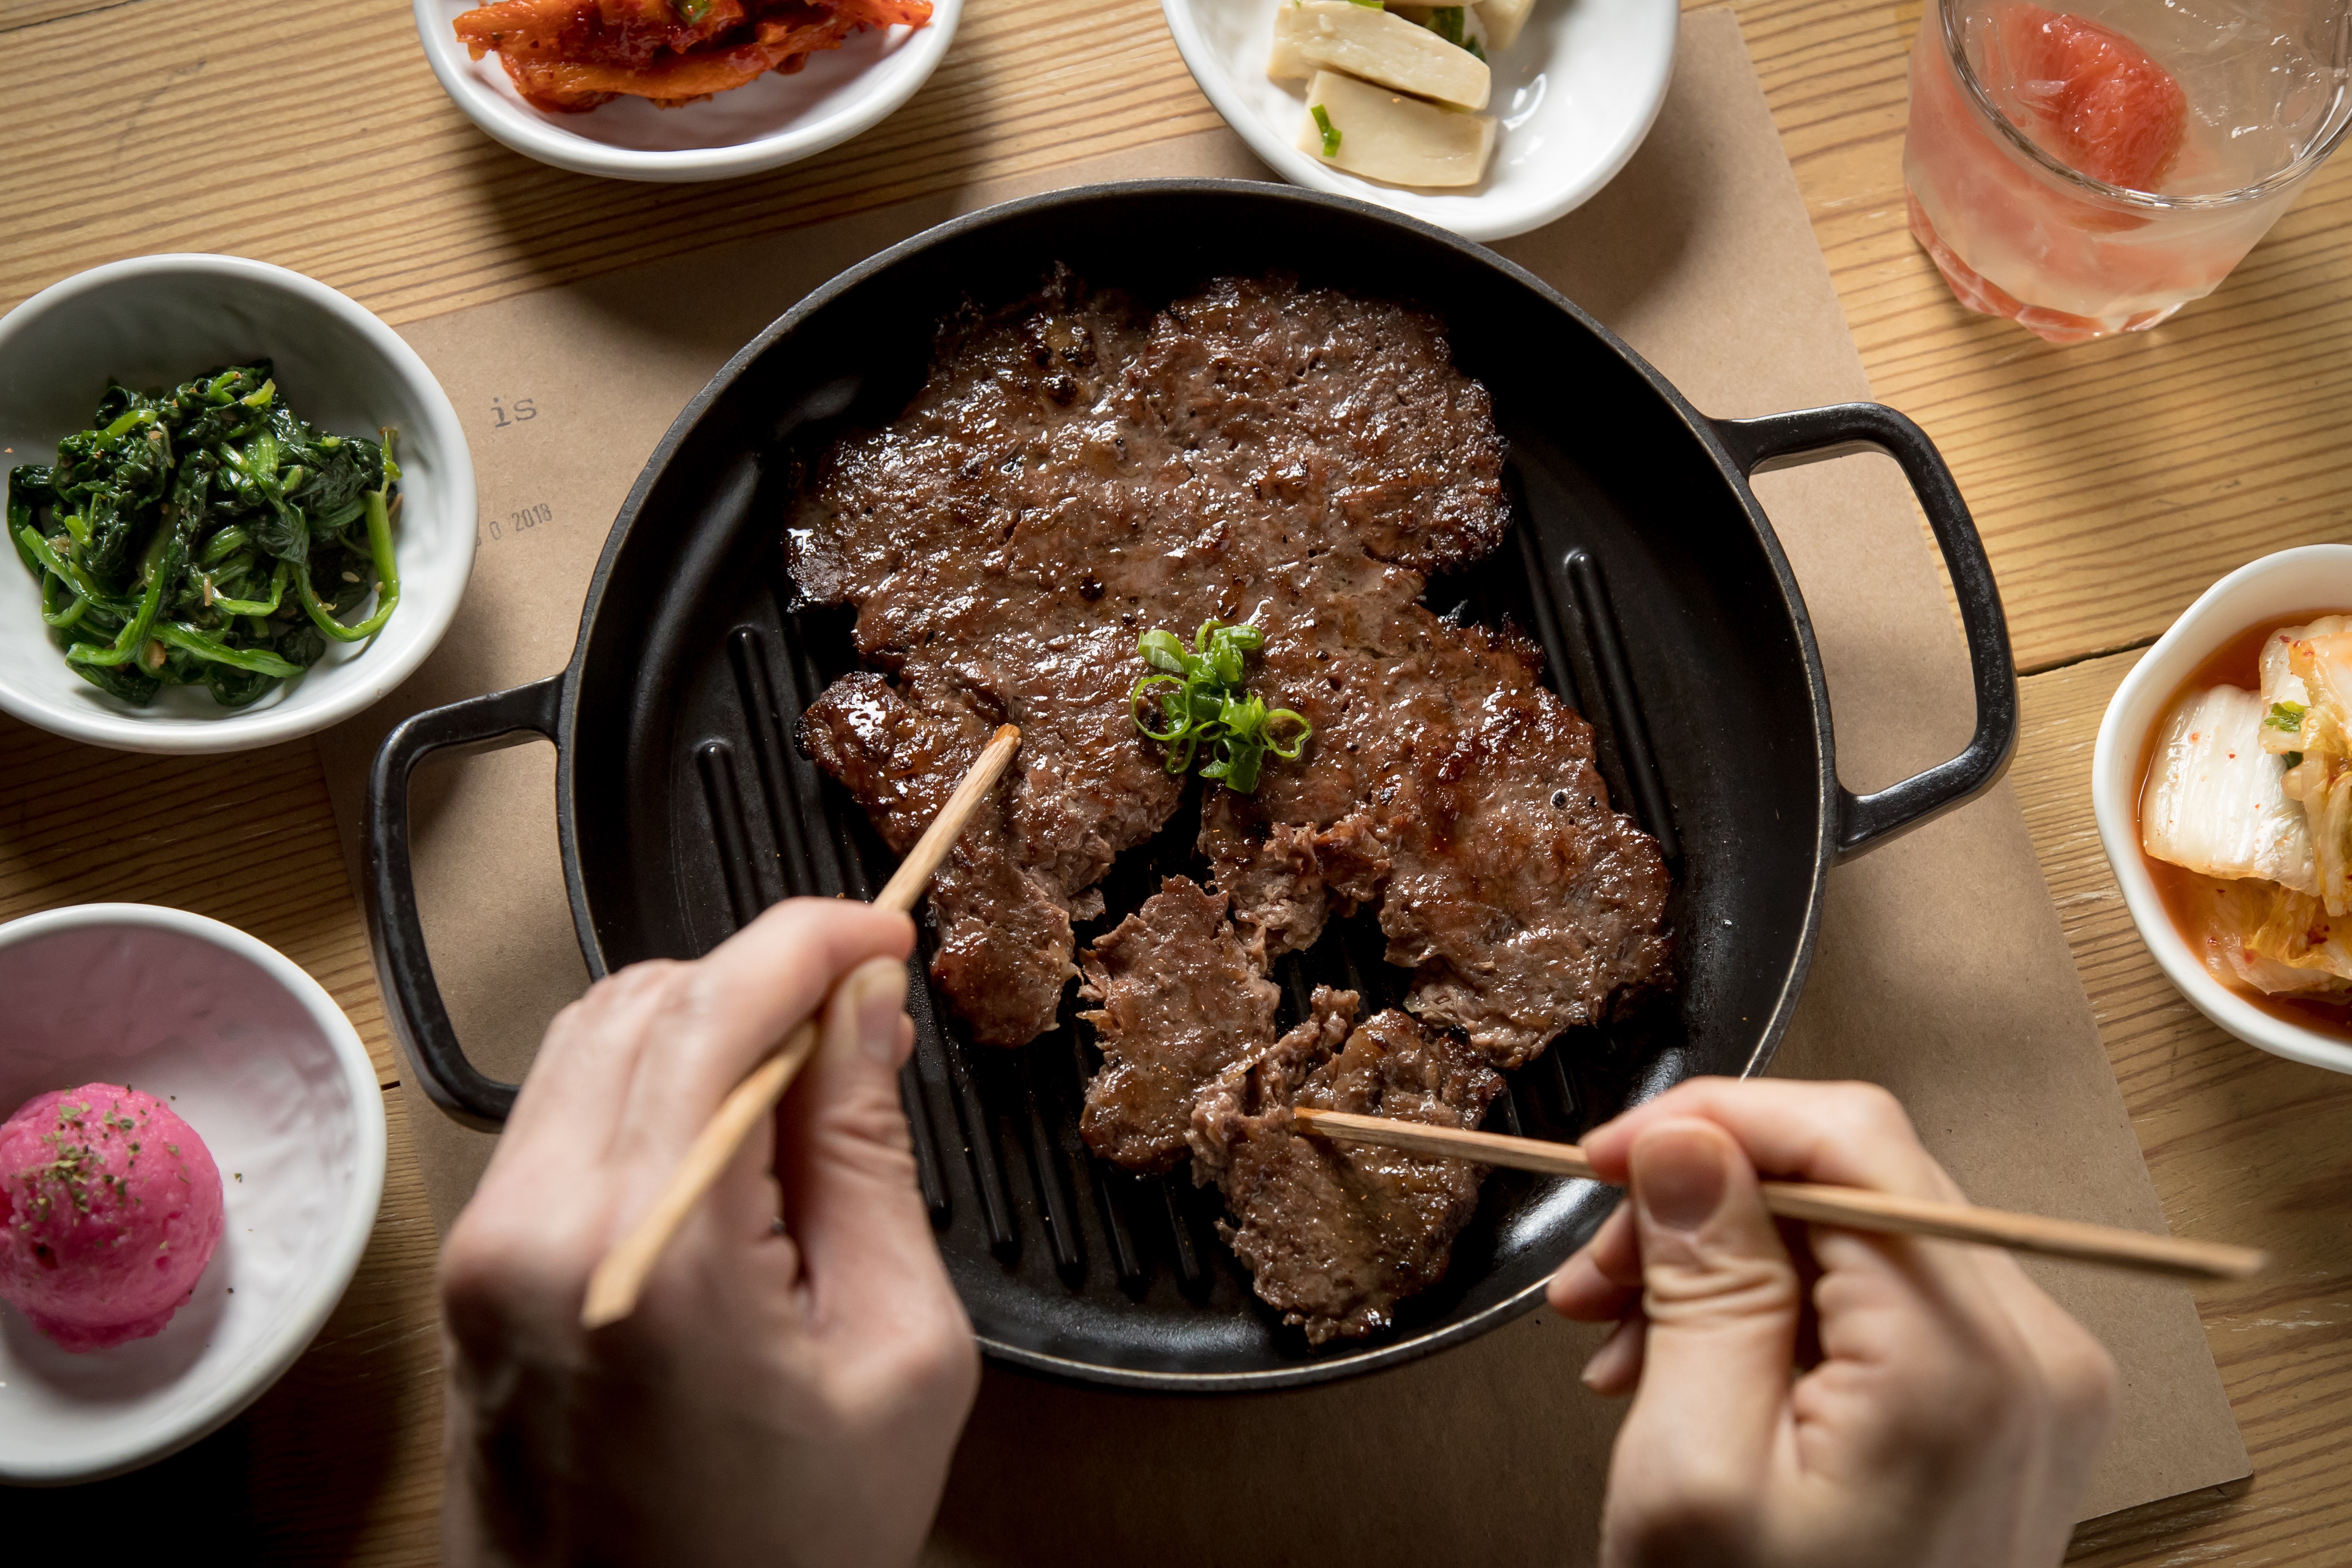 Fire-grilled bulgogi, being pulled apart by chopsticks